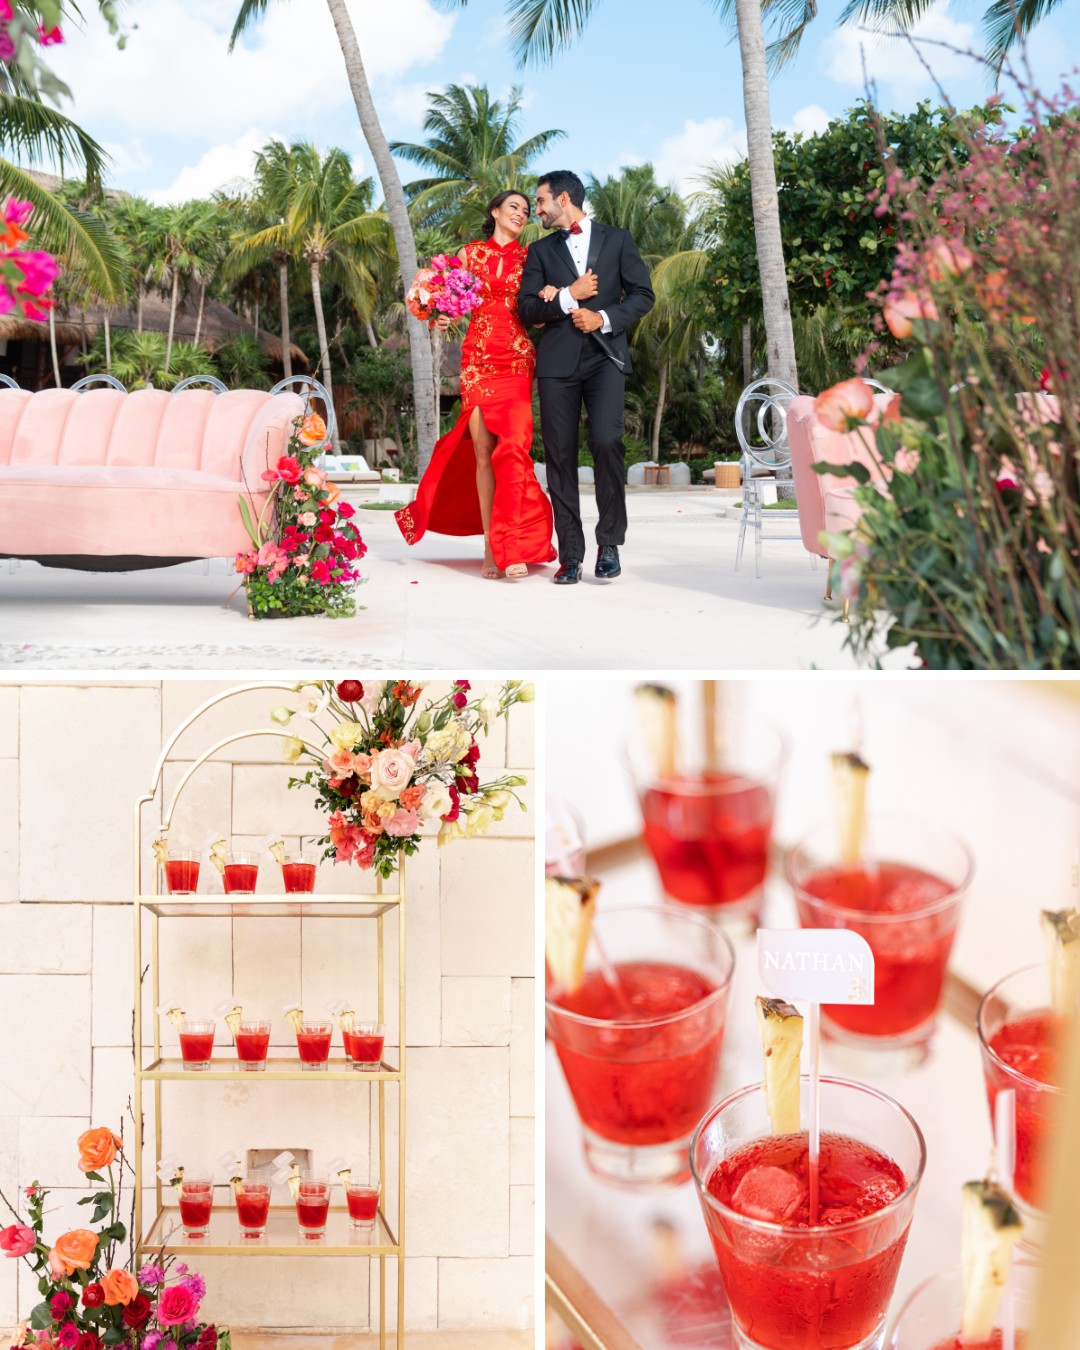 Collage of bride and groom on beach and red signature cocktail drinks